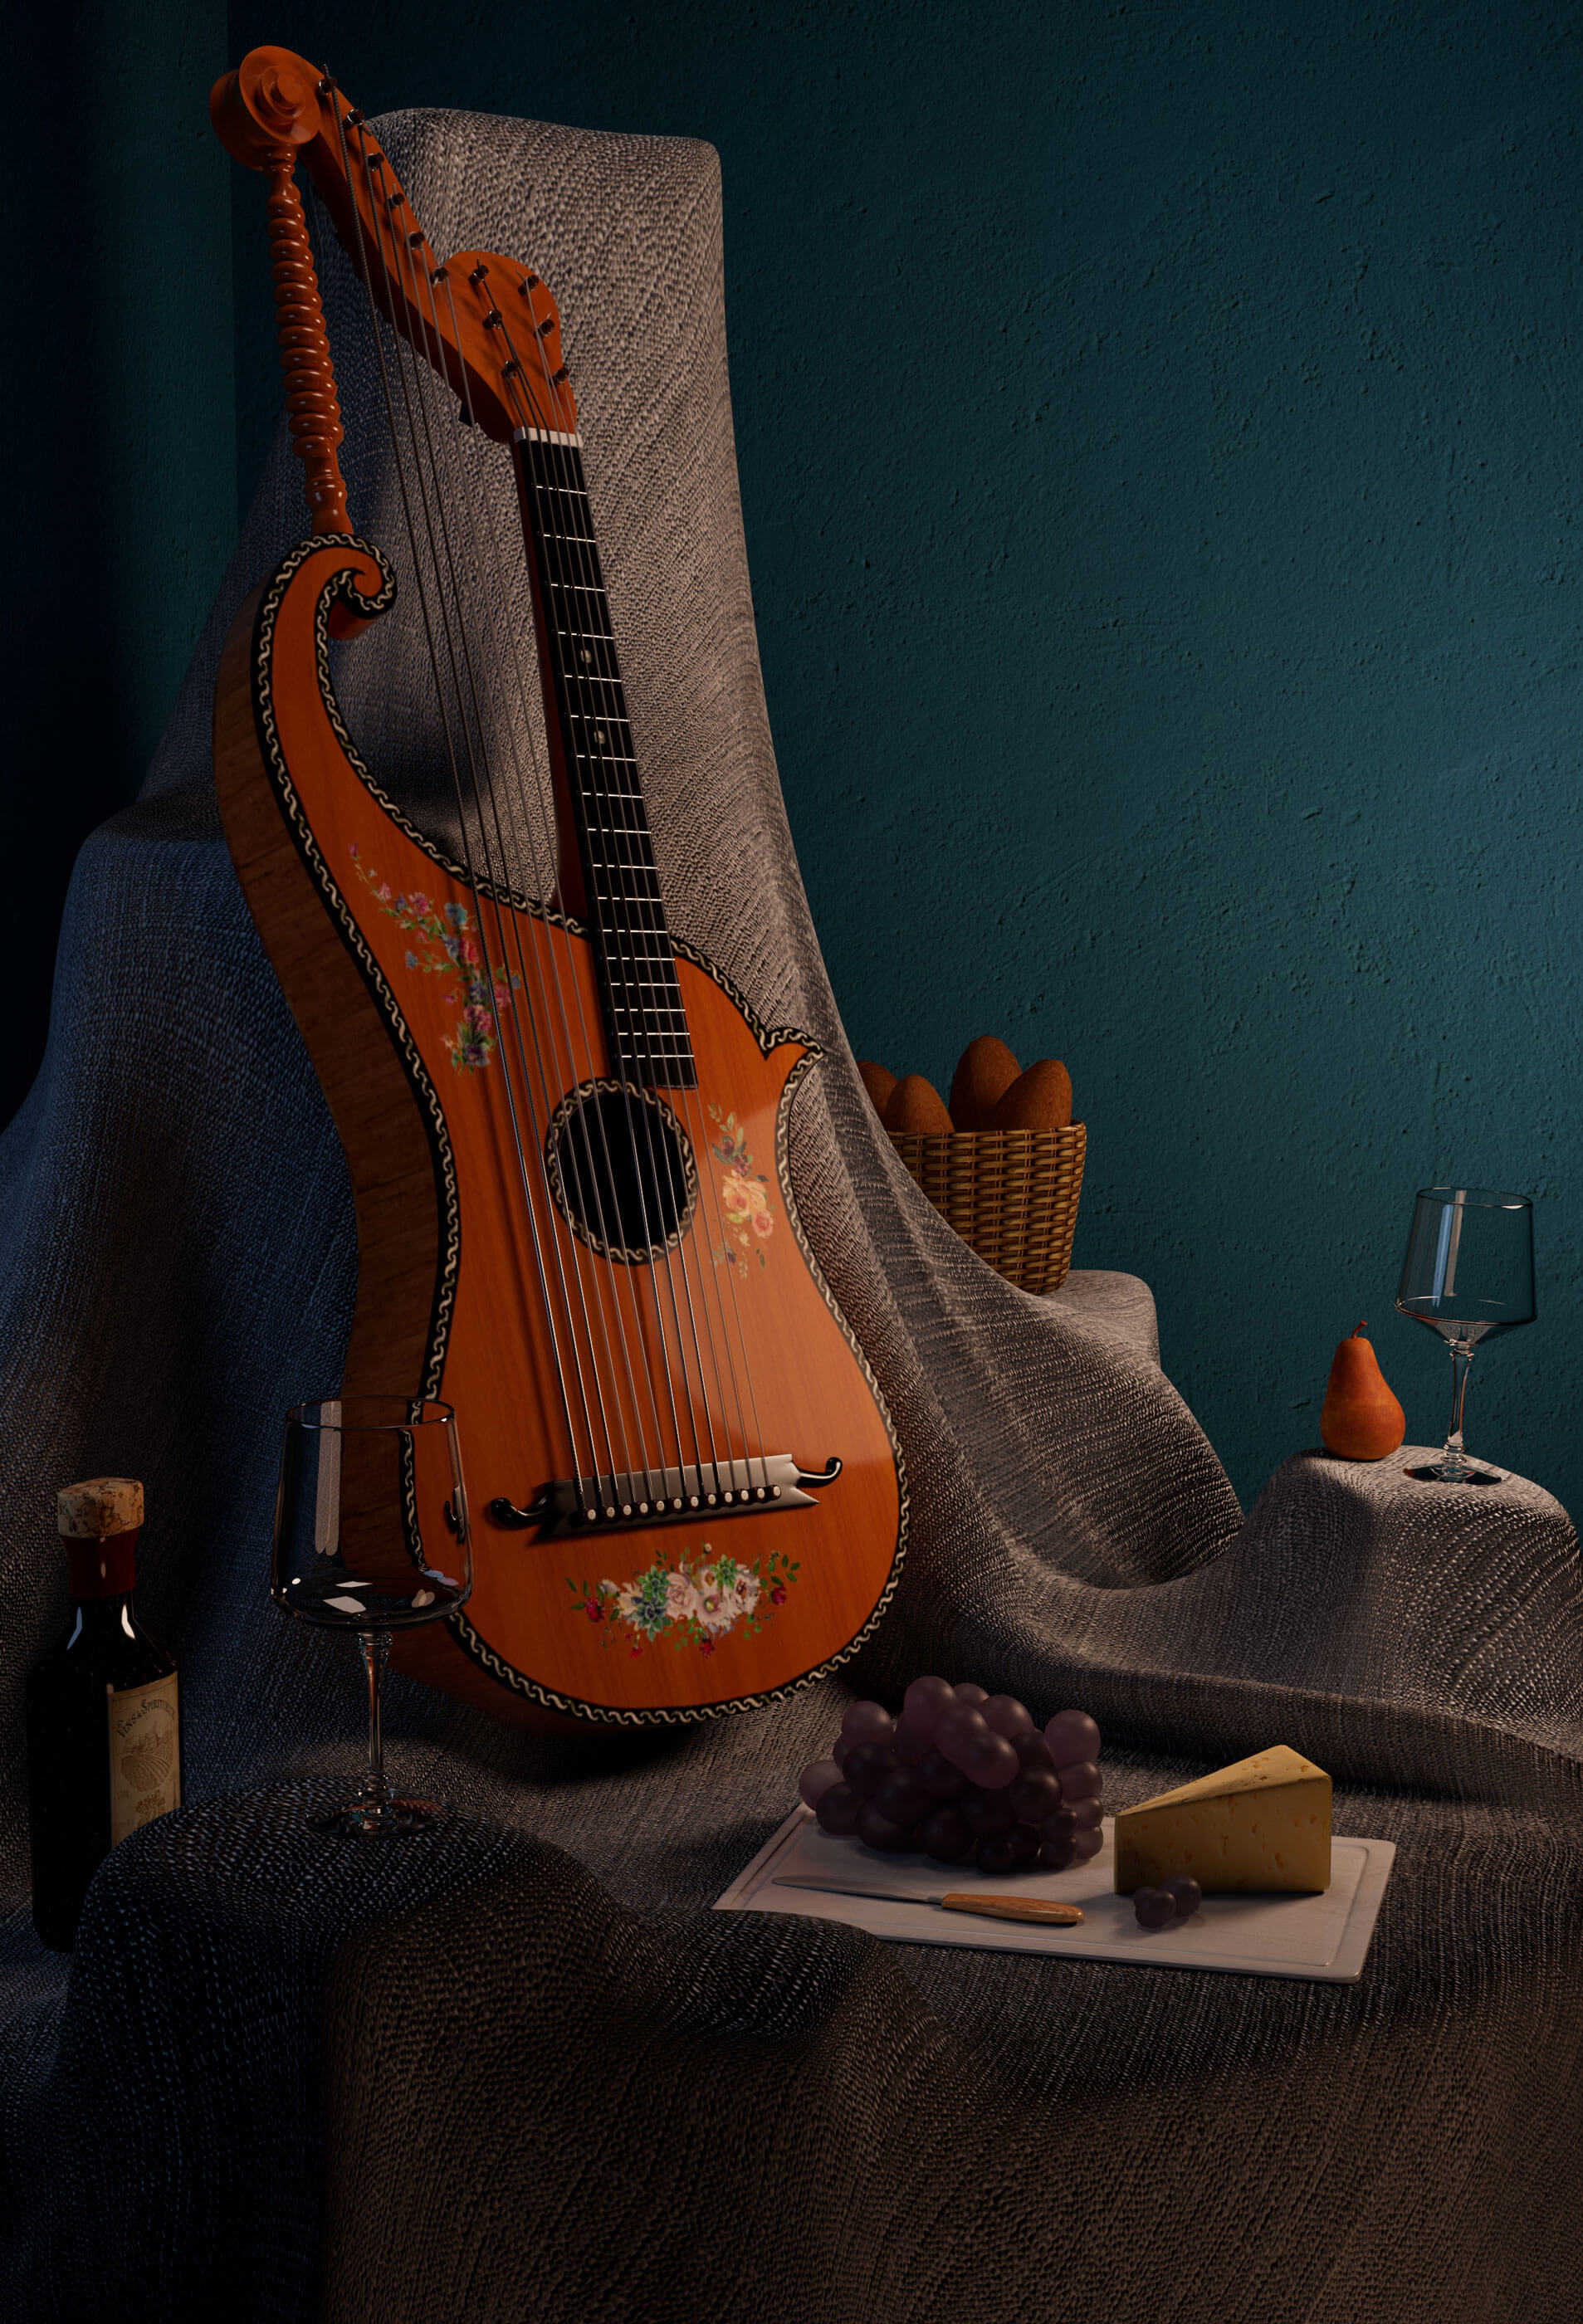 An intricate string instrument on a covered chair with food and wine.